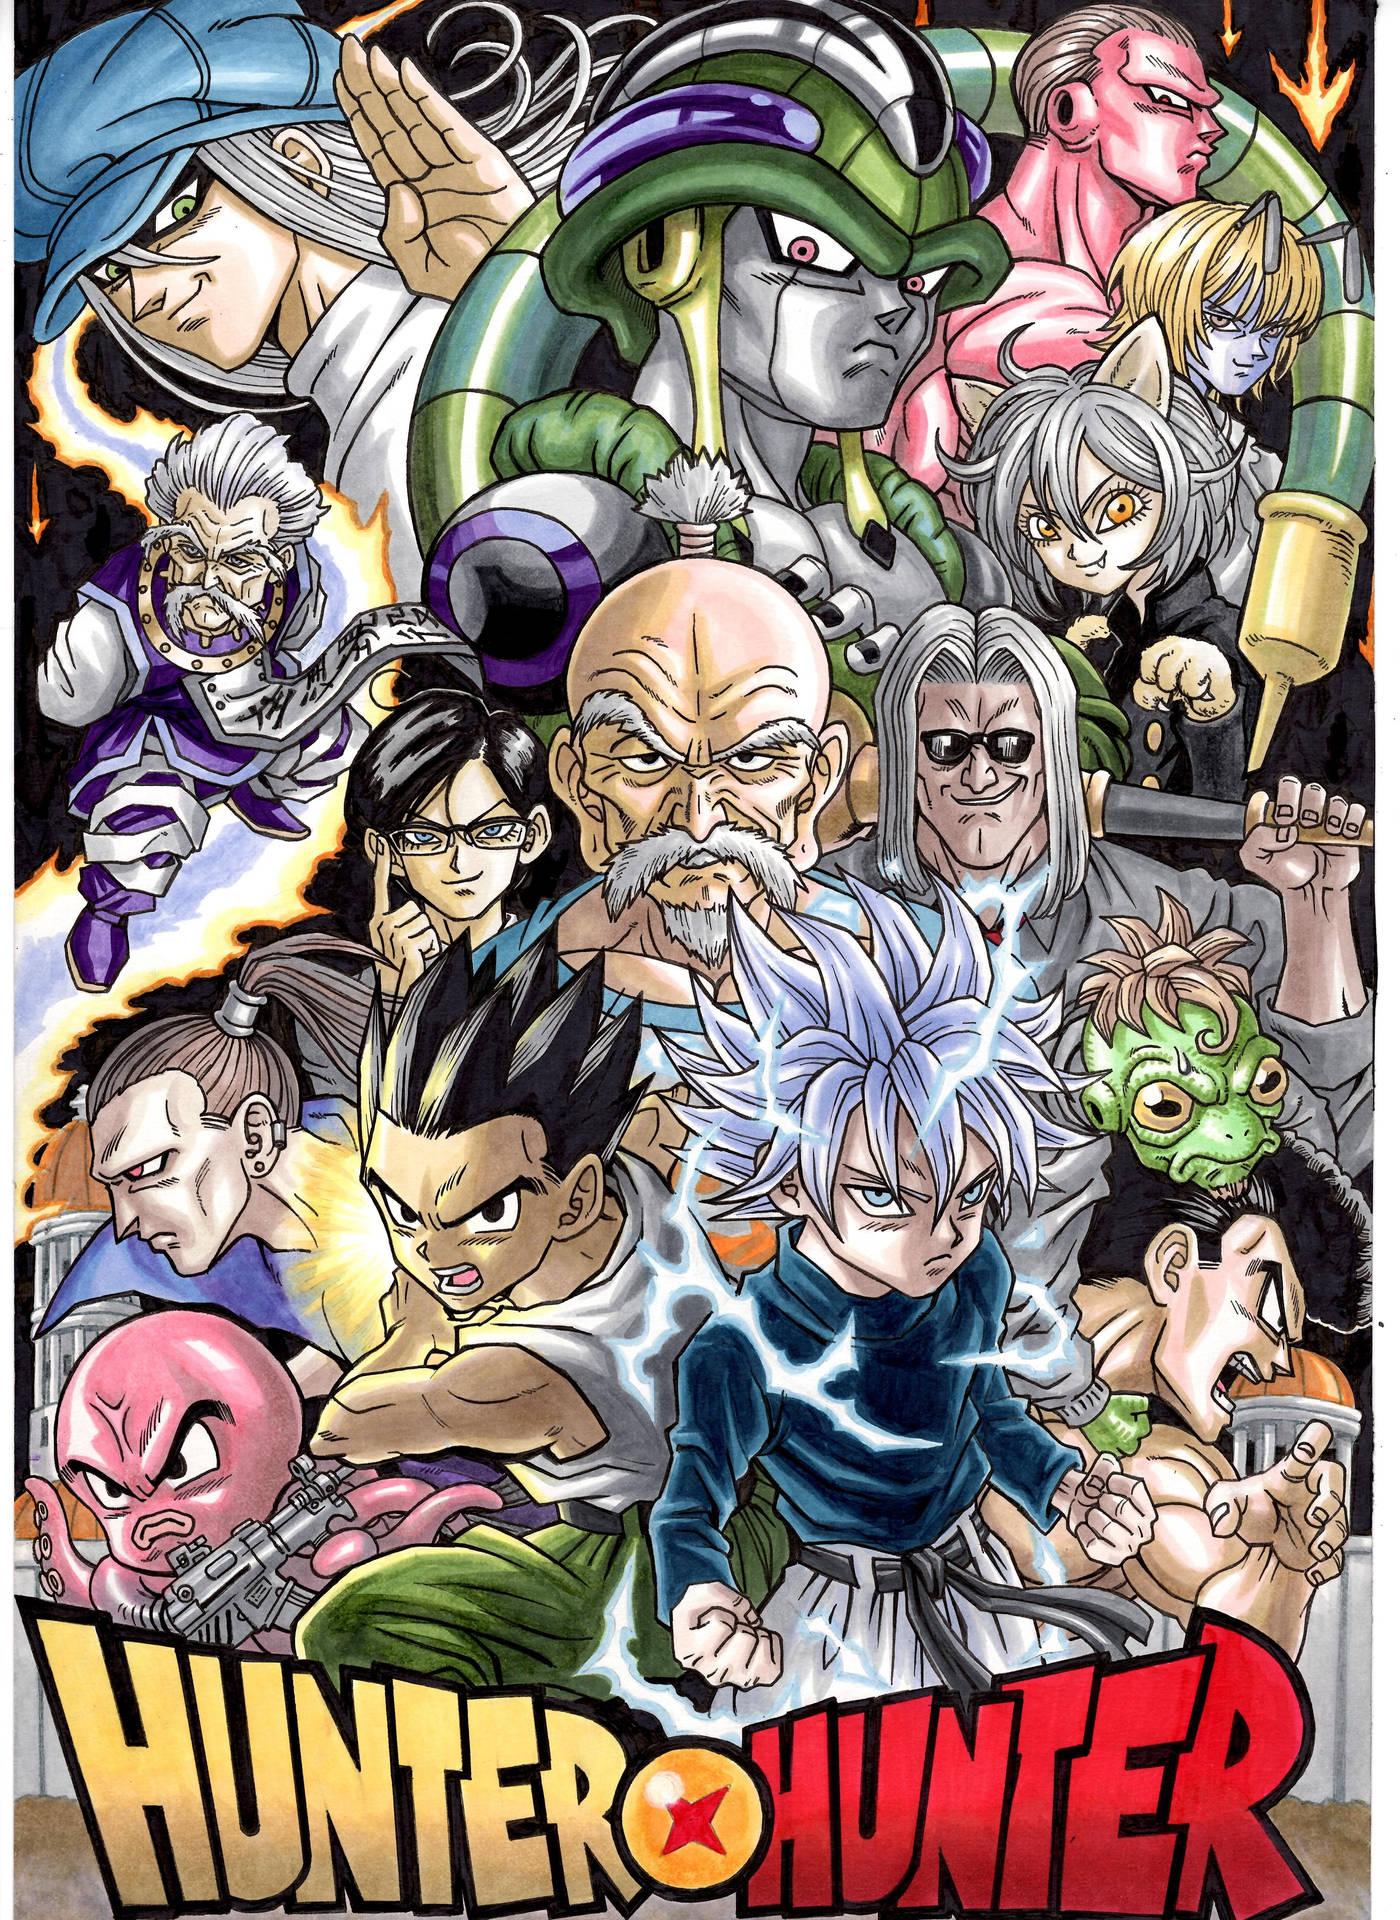 Celebrate Classic Anime with the Hunter X Hunter iPhone Wallpaper